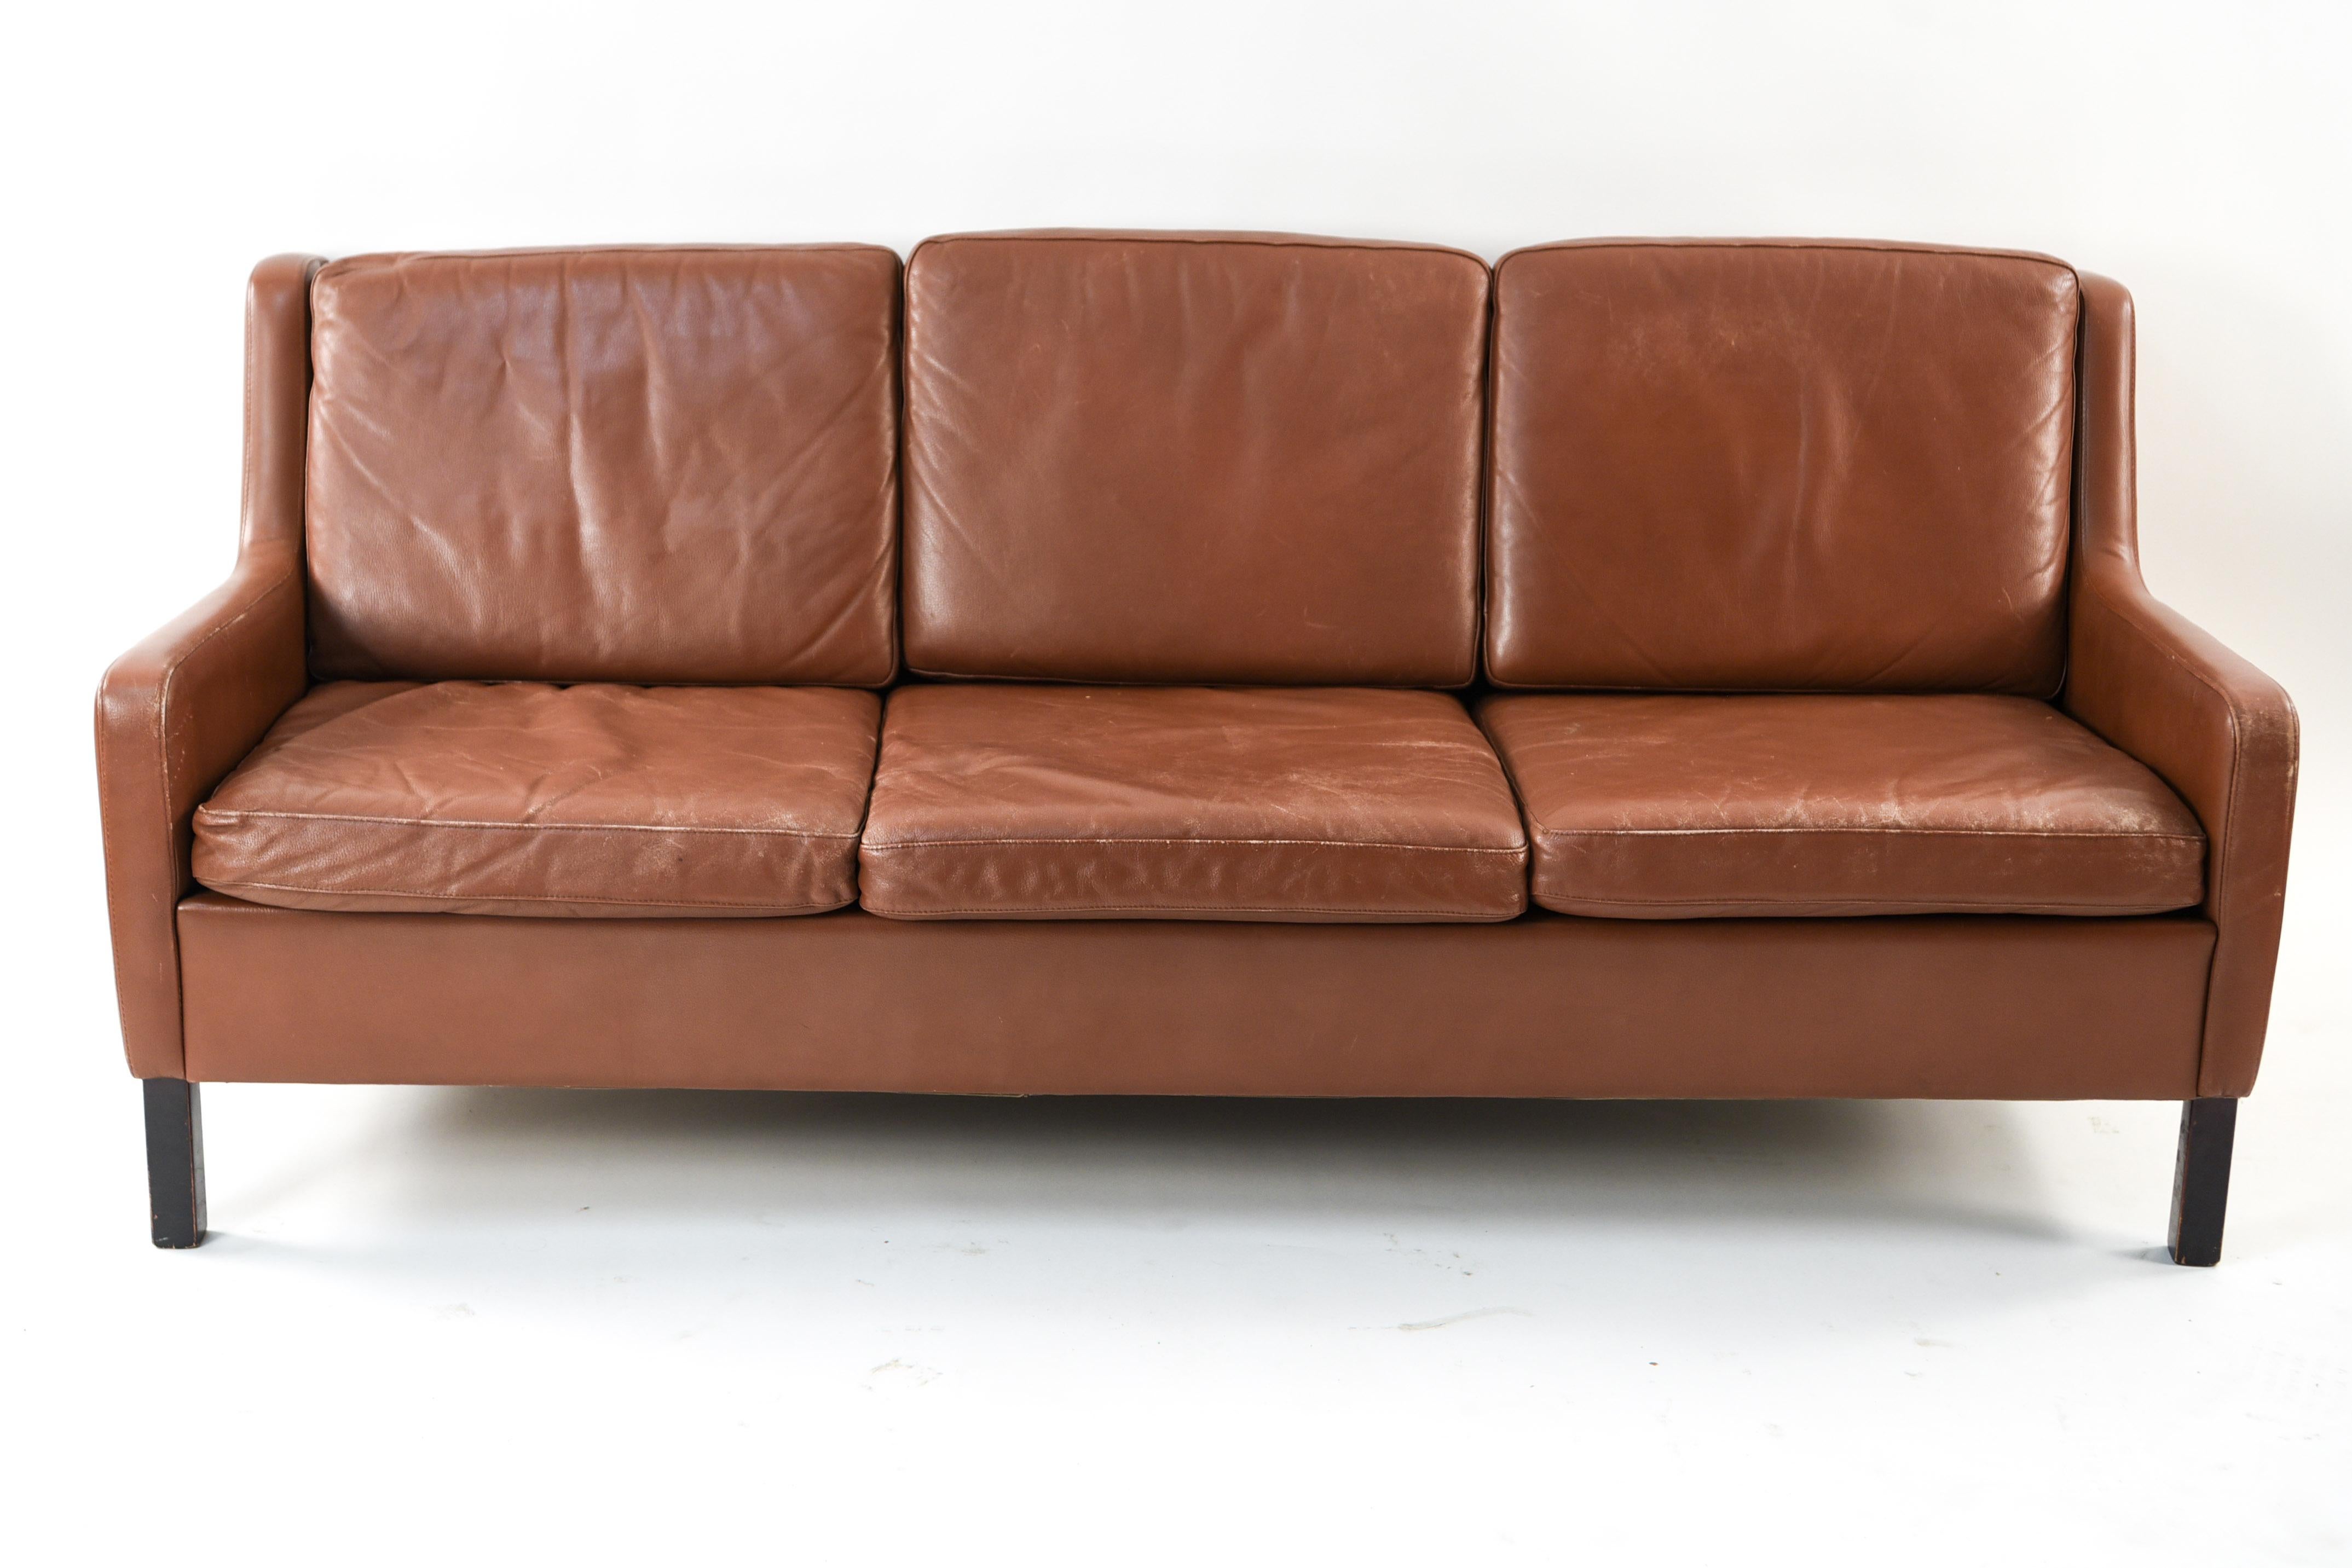 This three-seat sofa is in the manner of Danish designer Borge Mogensen. This fabulous piece is upholstered in supple, vintage leather with a wonderful patina.